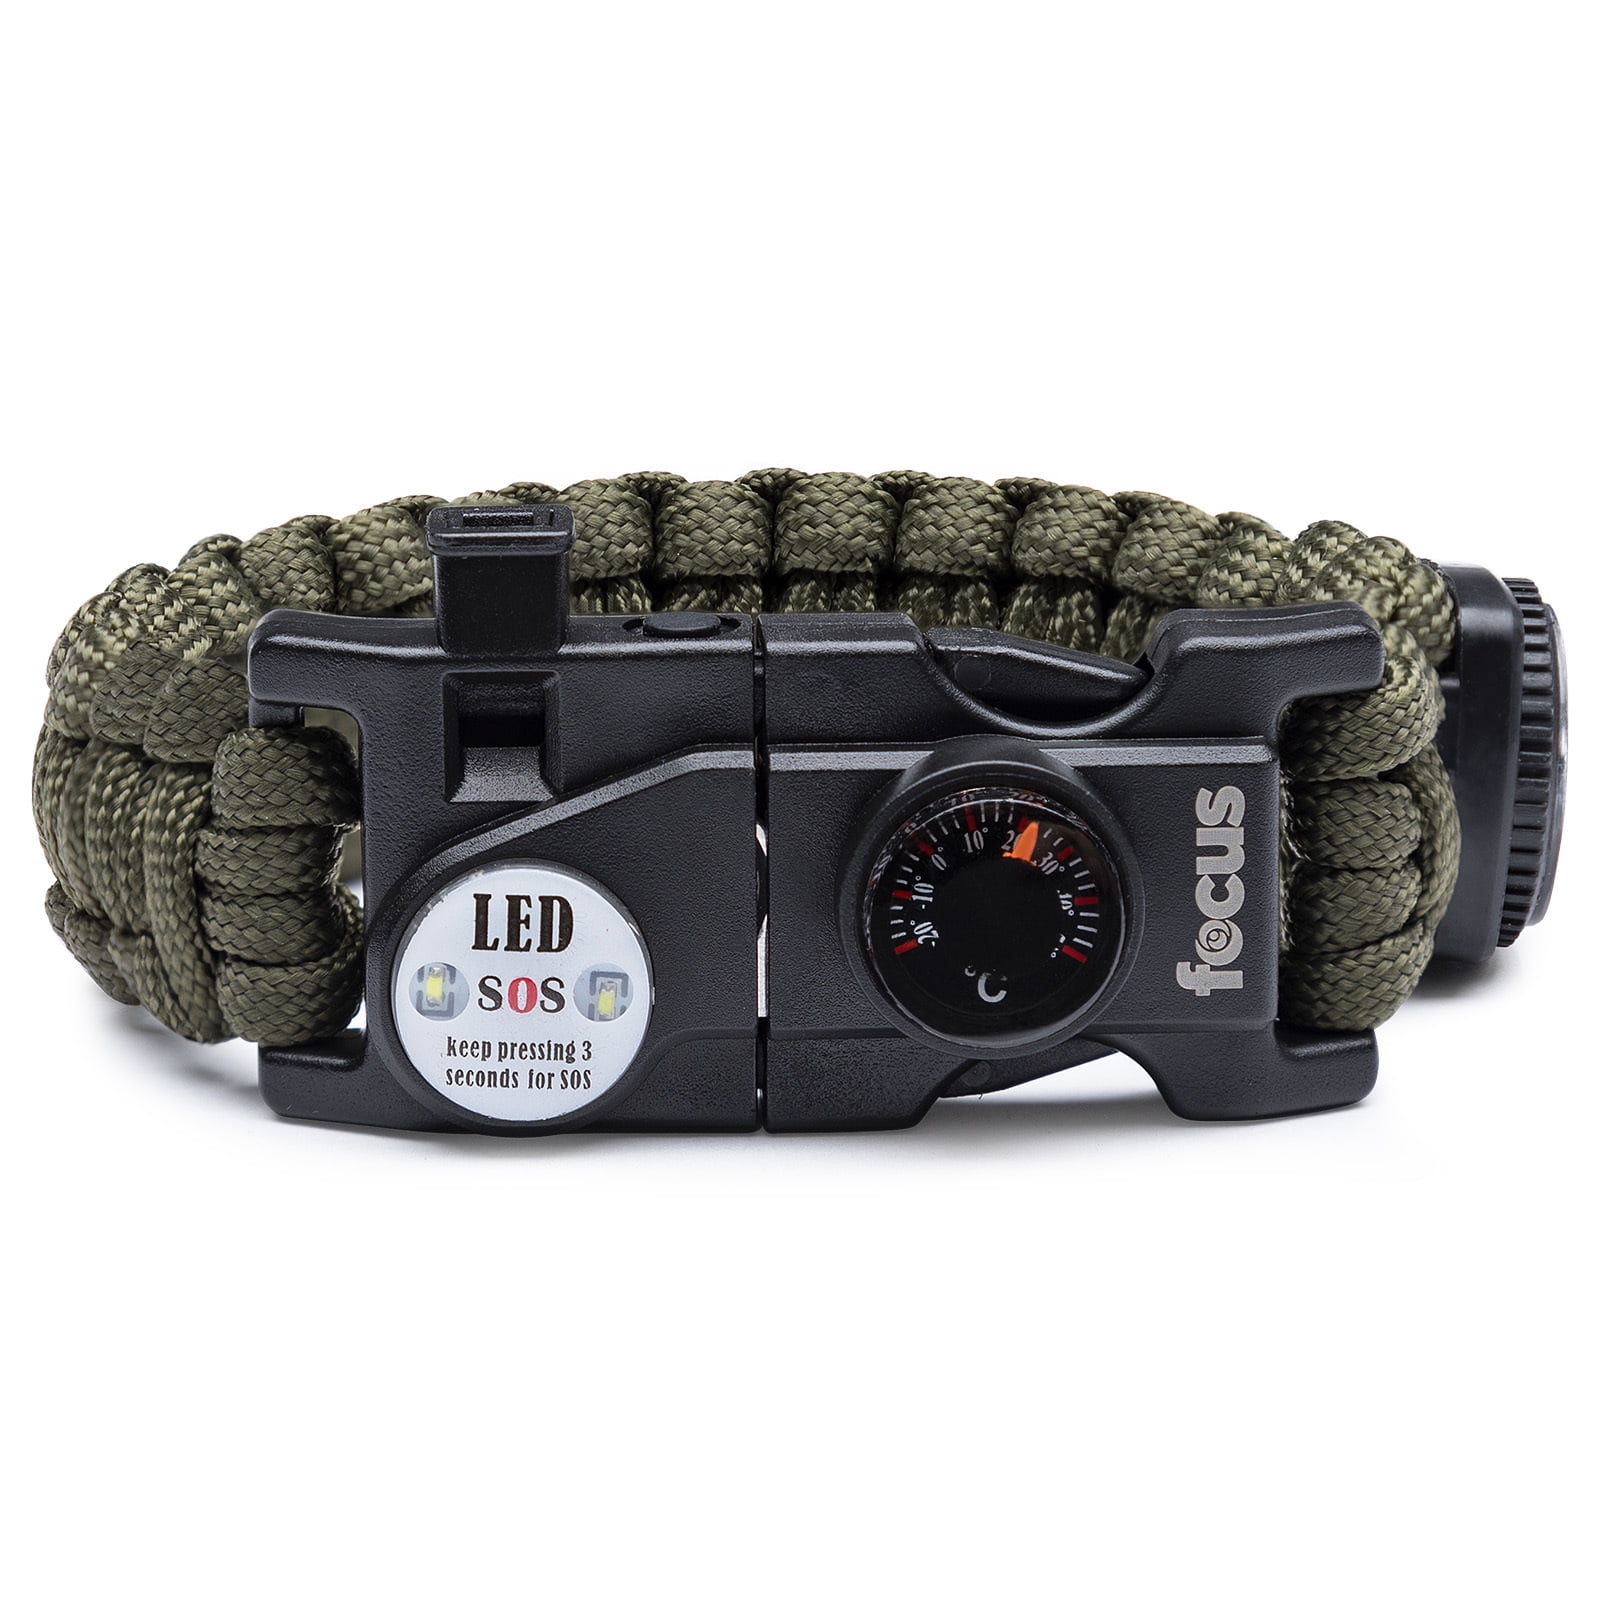 20 in 1 Paracord Survival Bracelet Outdoor SOS Whistle LED Compass Flint Tool CO 